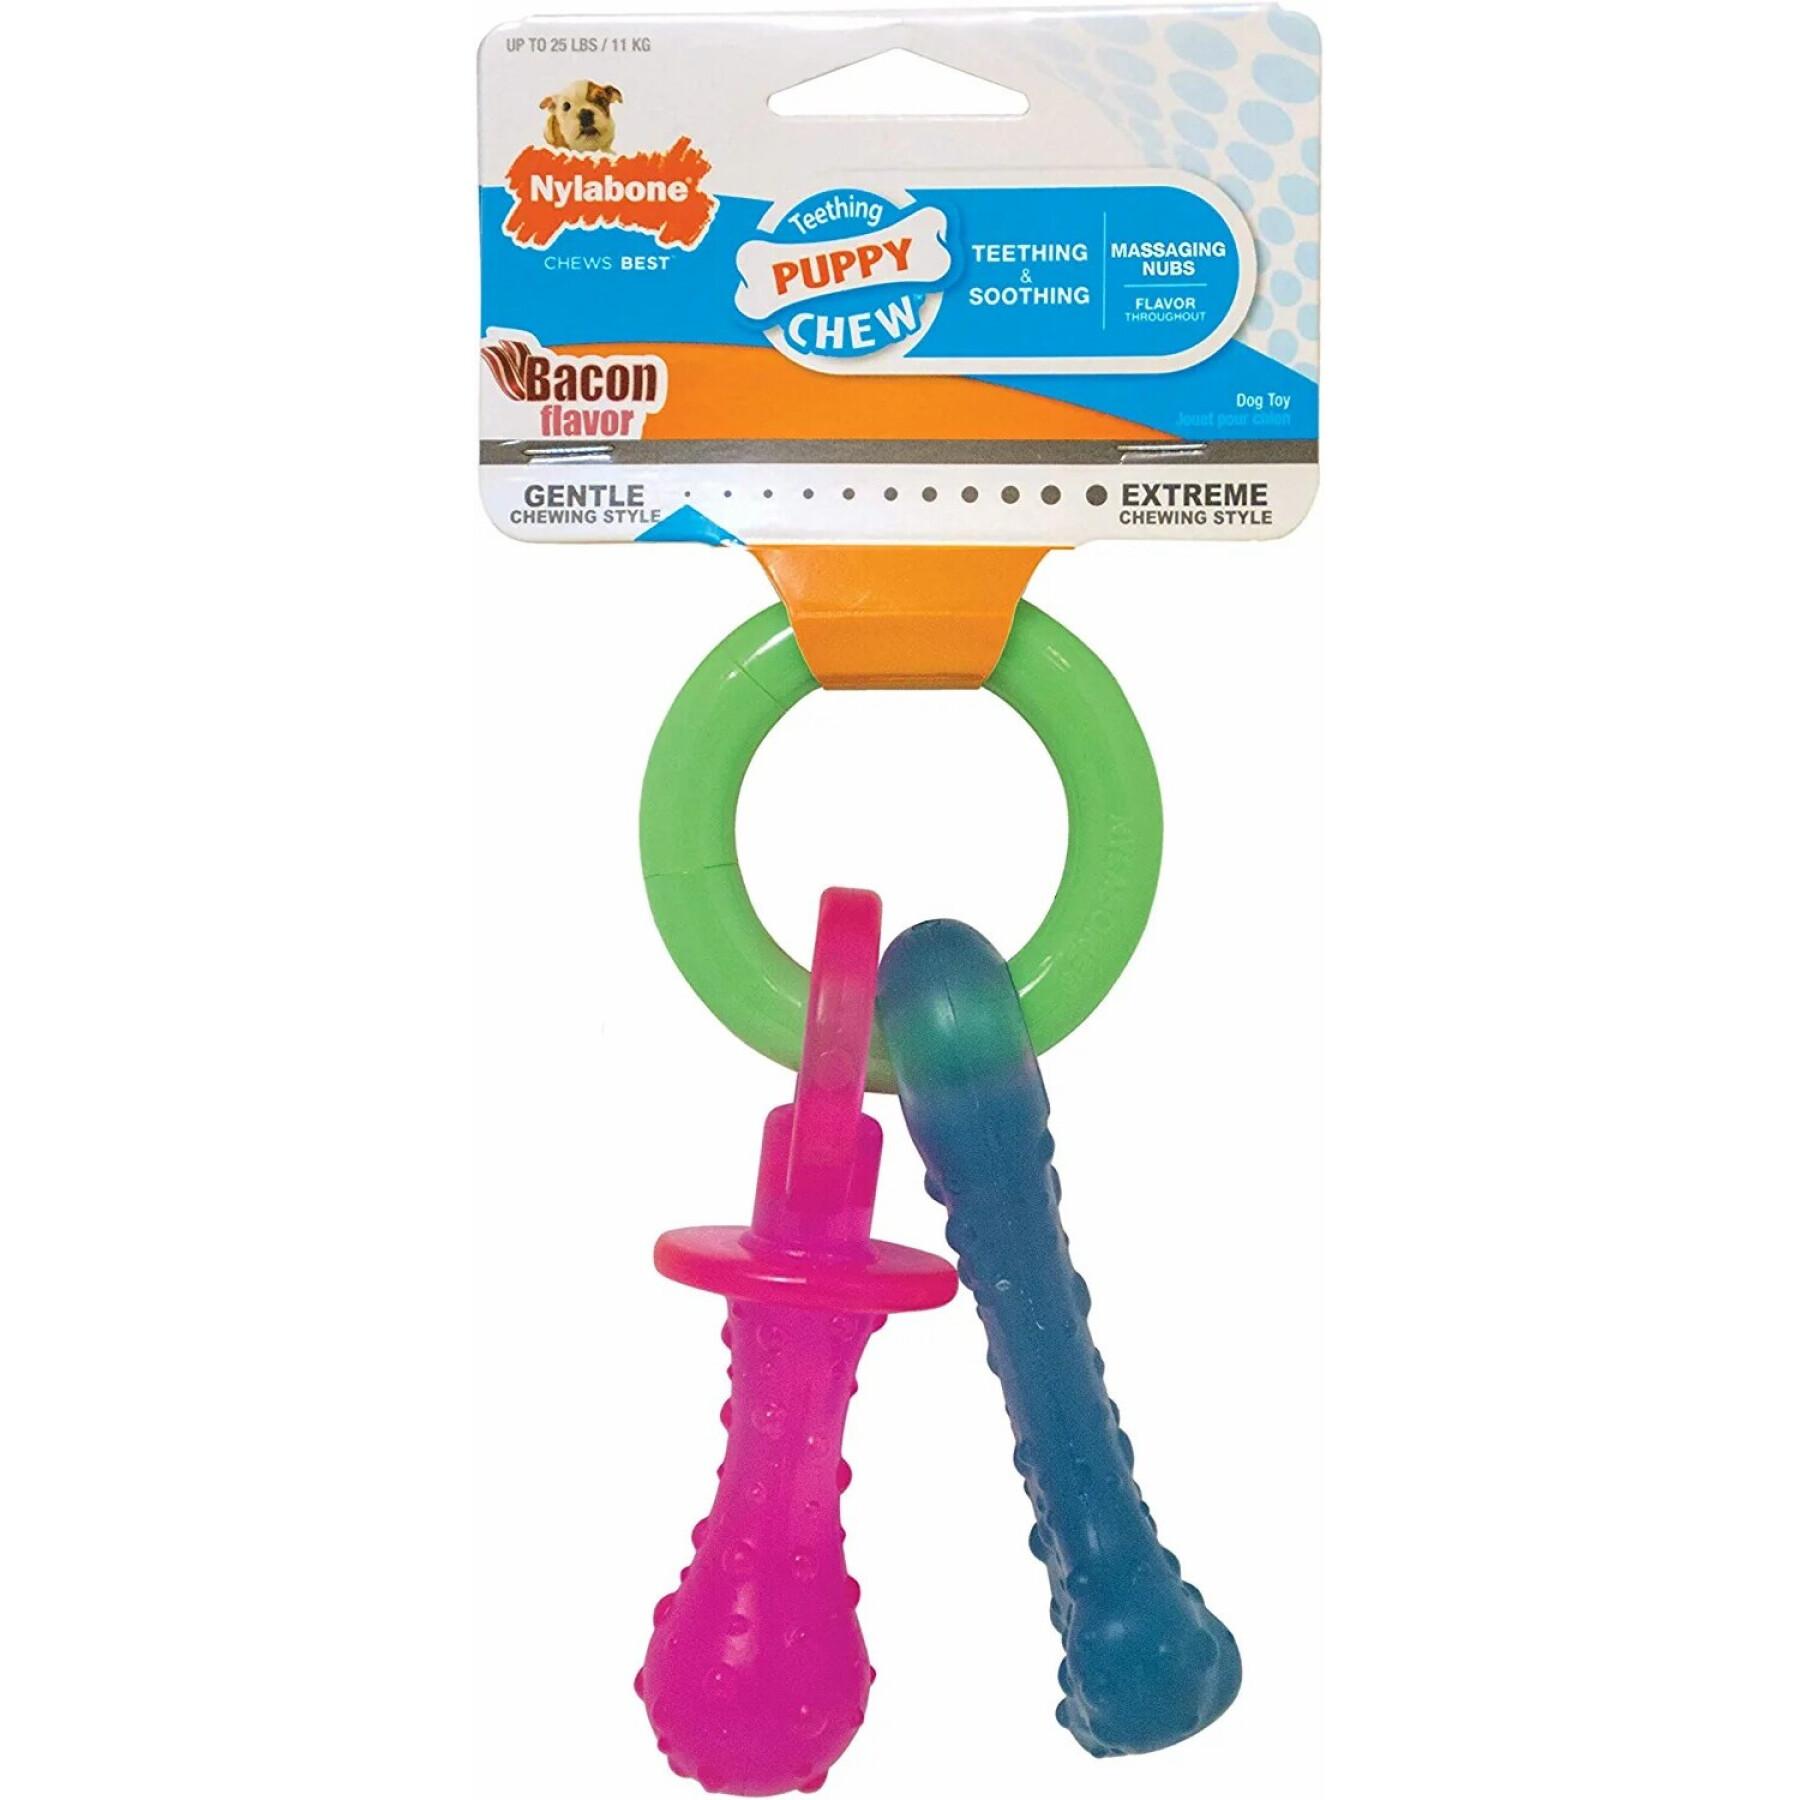 Jouet pour chien Nylabone Puppy Teething Pacifier - Bacon XS